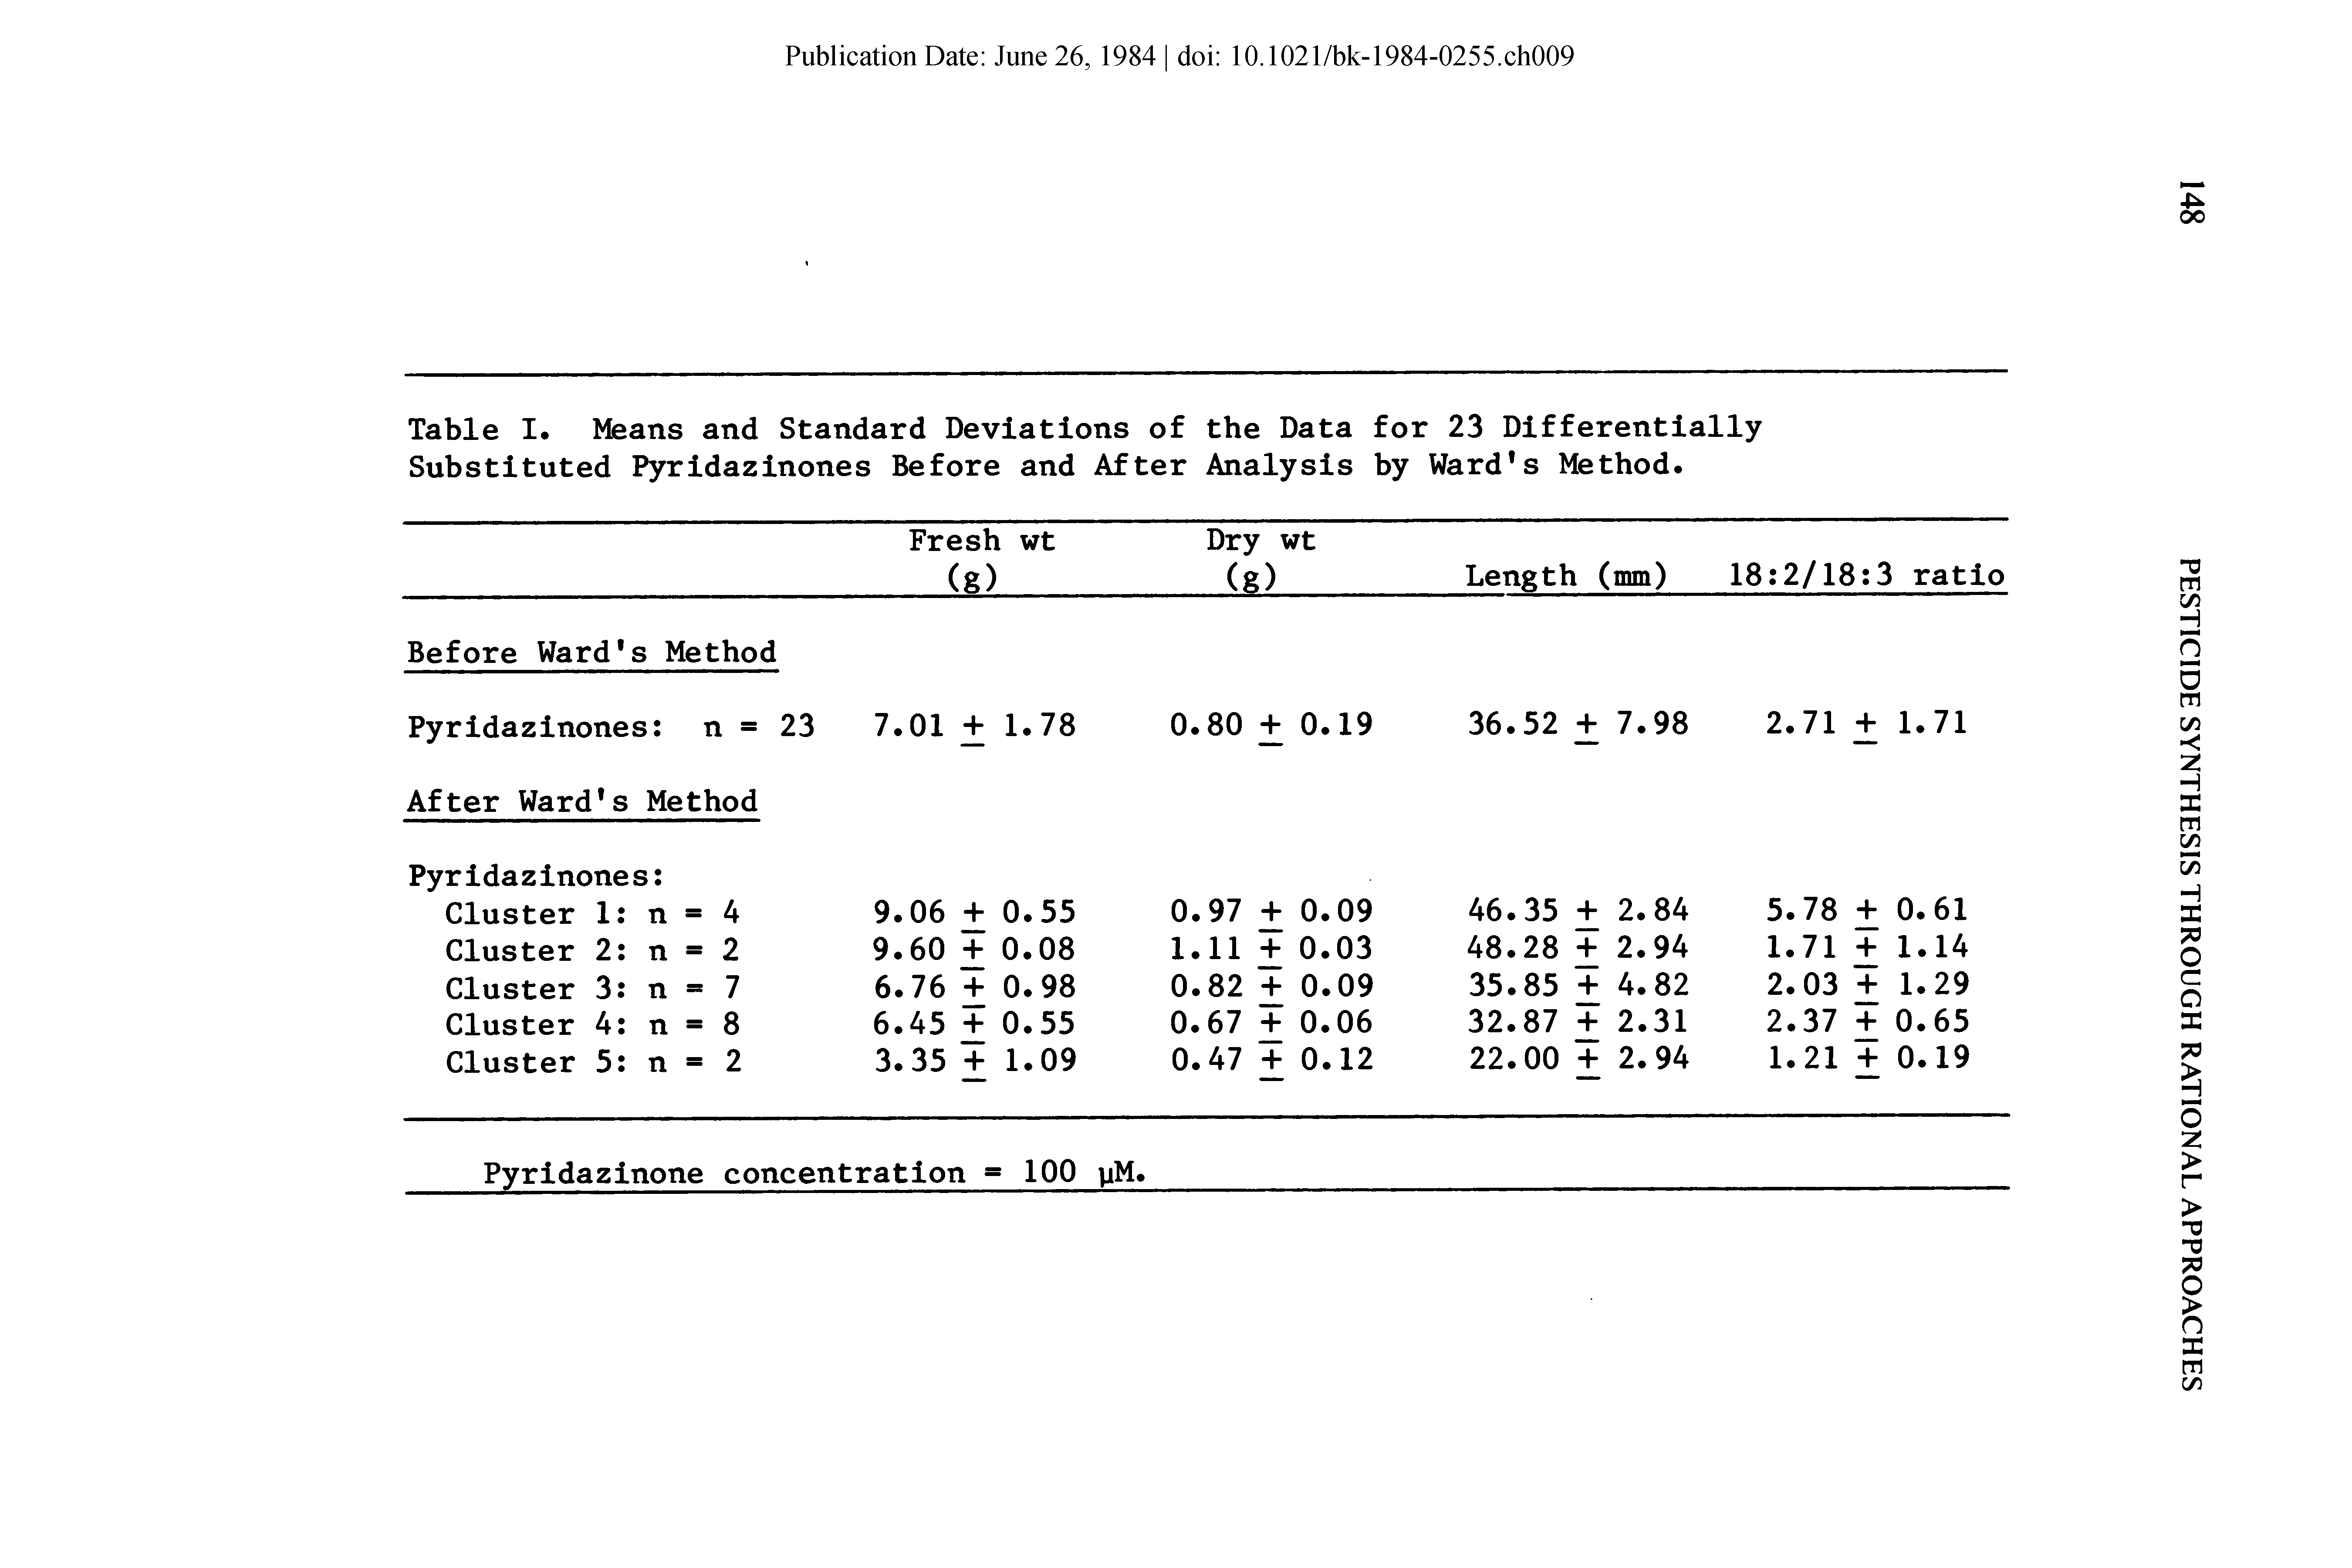 Table I. Means and Standard Deviations of the Data for 23 Differentially Substituted Pyridazinones Before and After Analysis by Ward s Method.